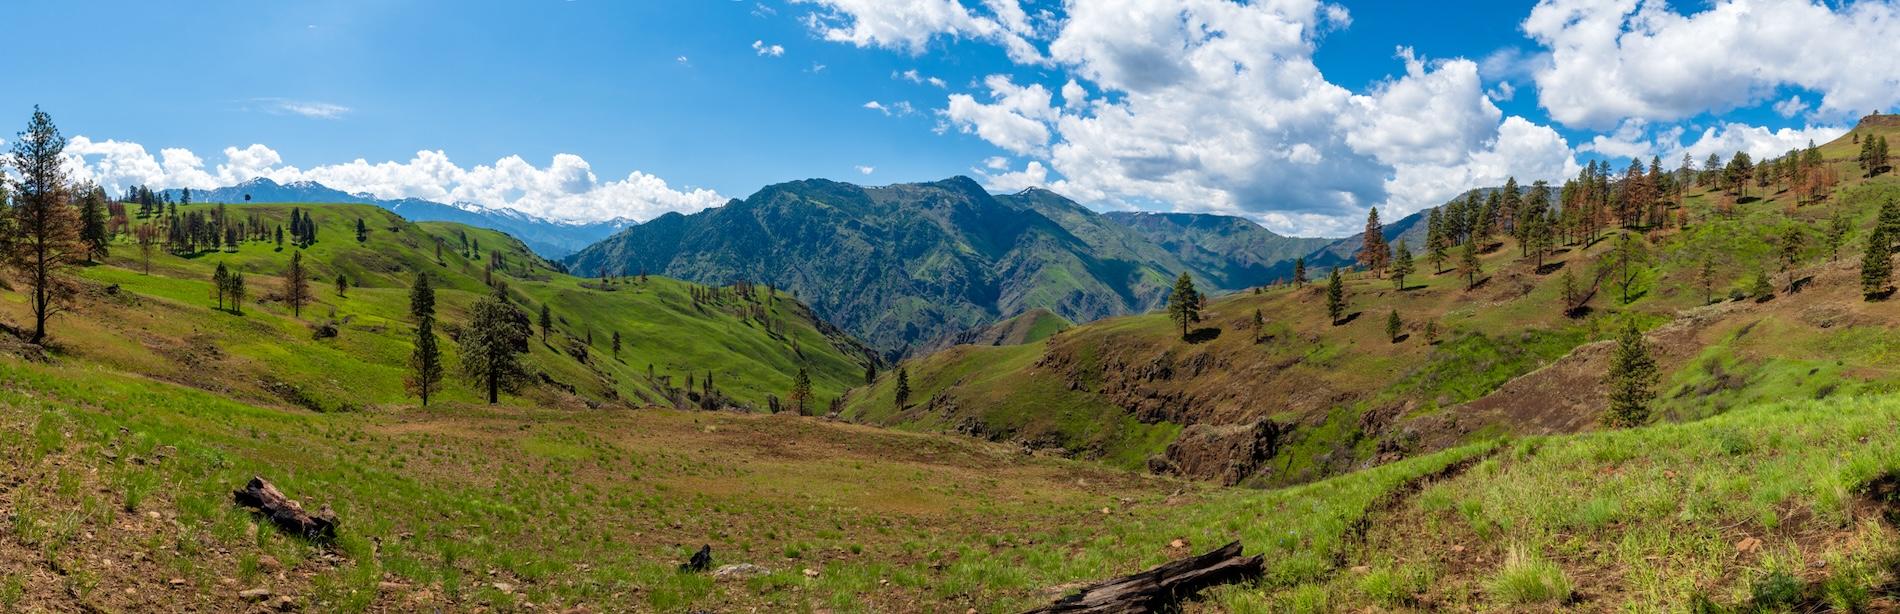 Panorama of Bear Mountain from the Bench Trail in Hells Canyon